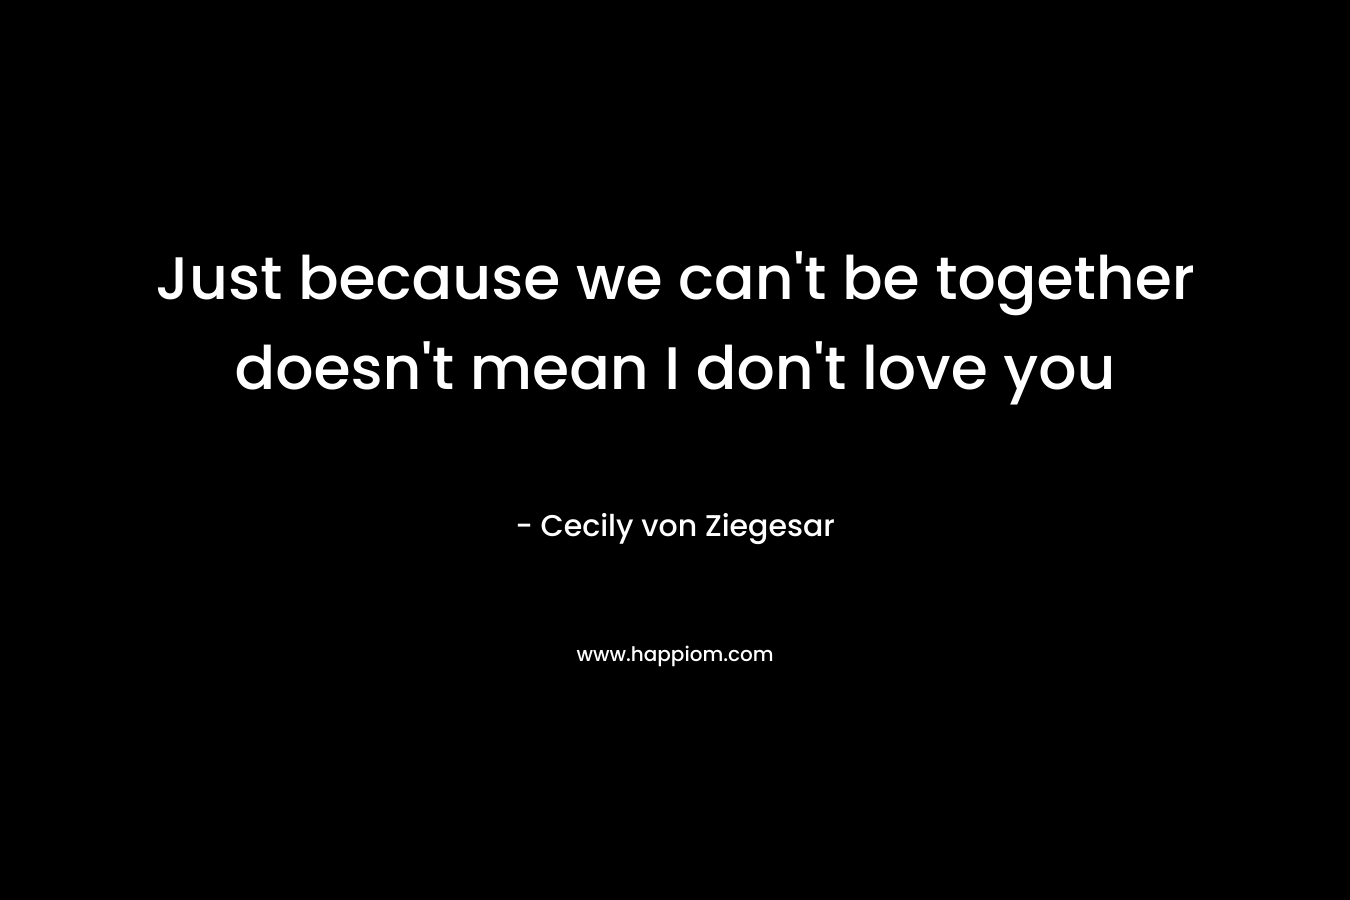 Just because we can't be together doesn't mean I don't love you